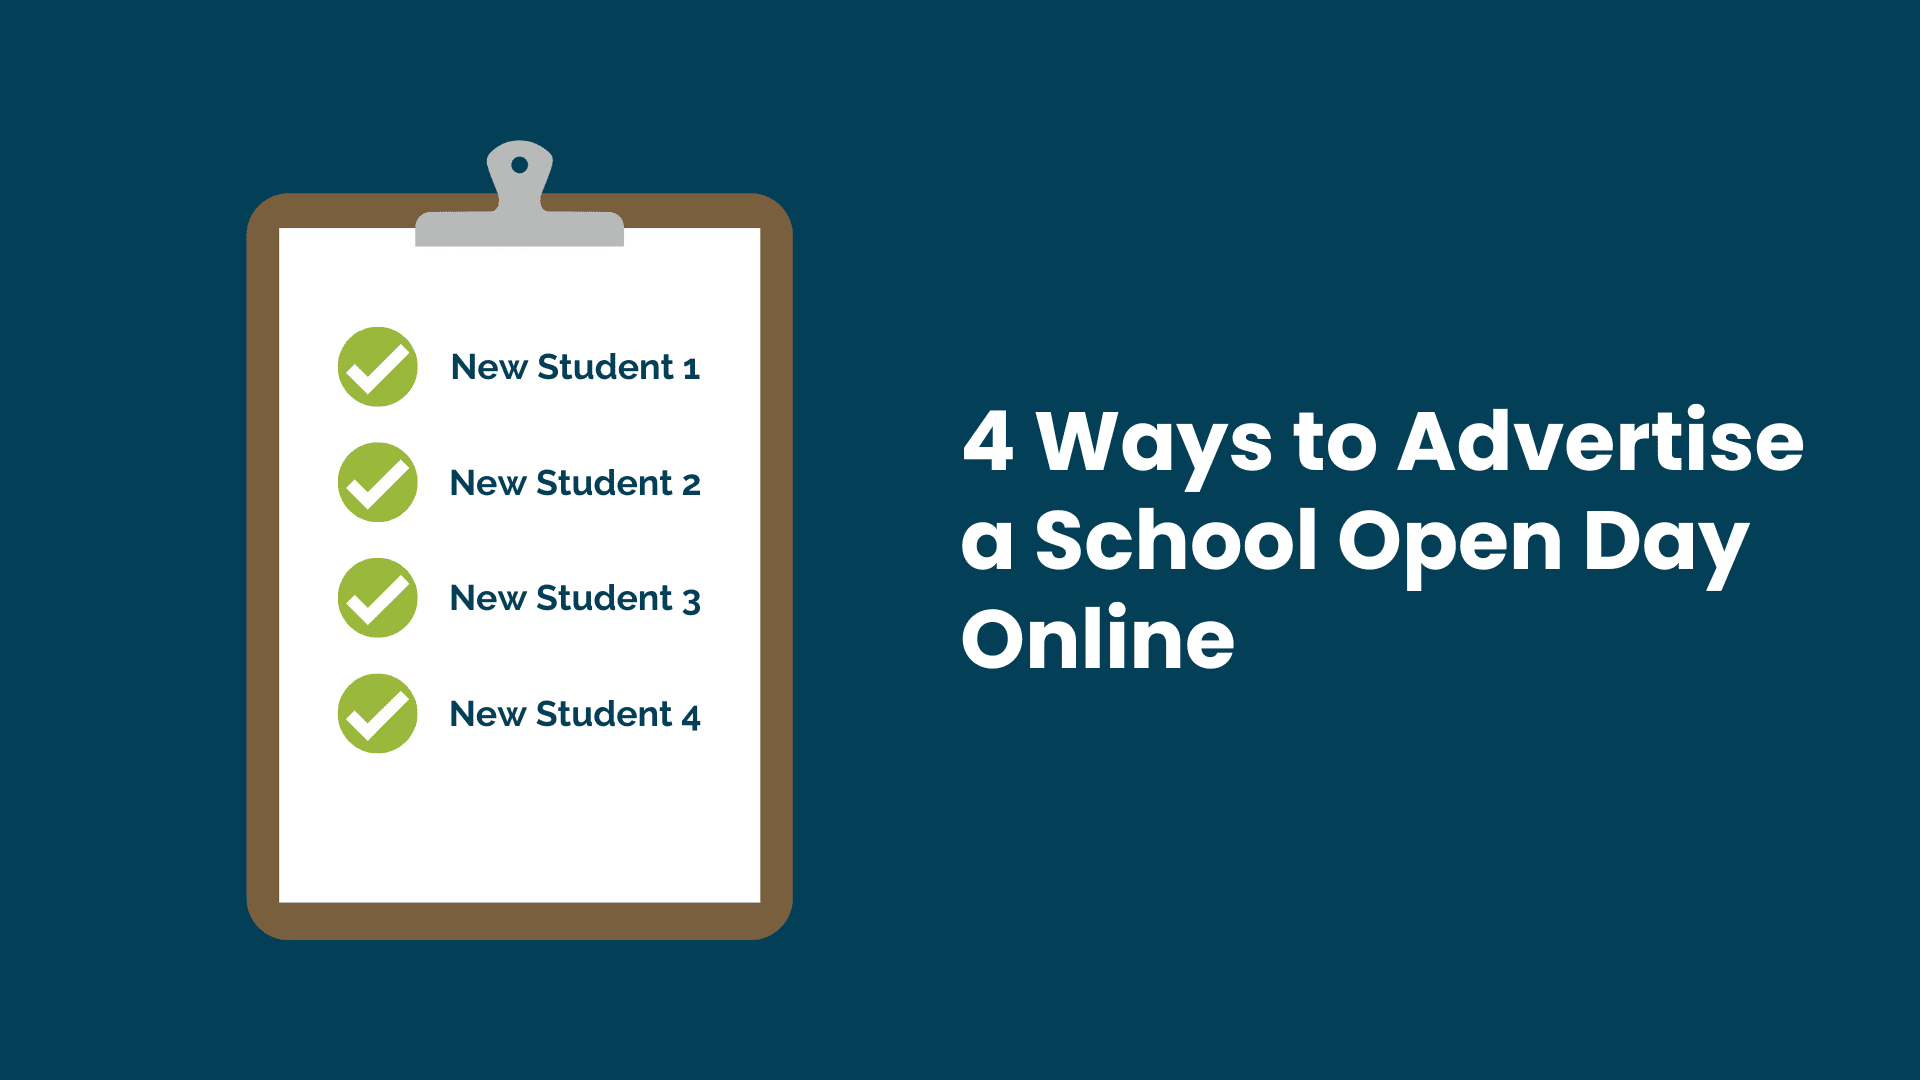 4 Ways to Advertise a School Open Day Online